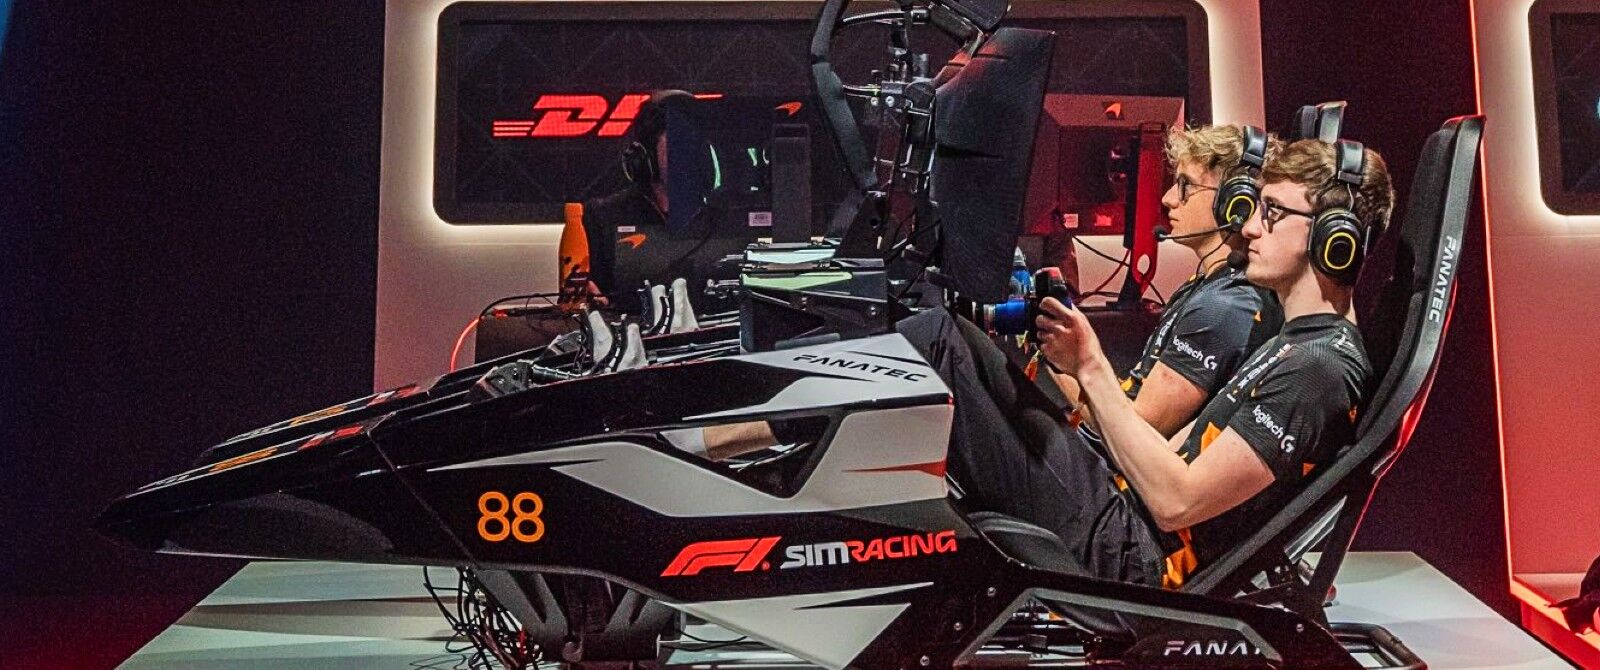 A sim racing setup with two people sat in rigs, one behind the other.